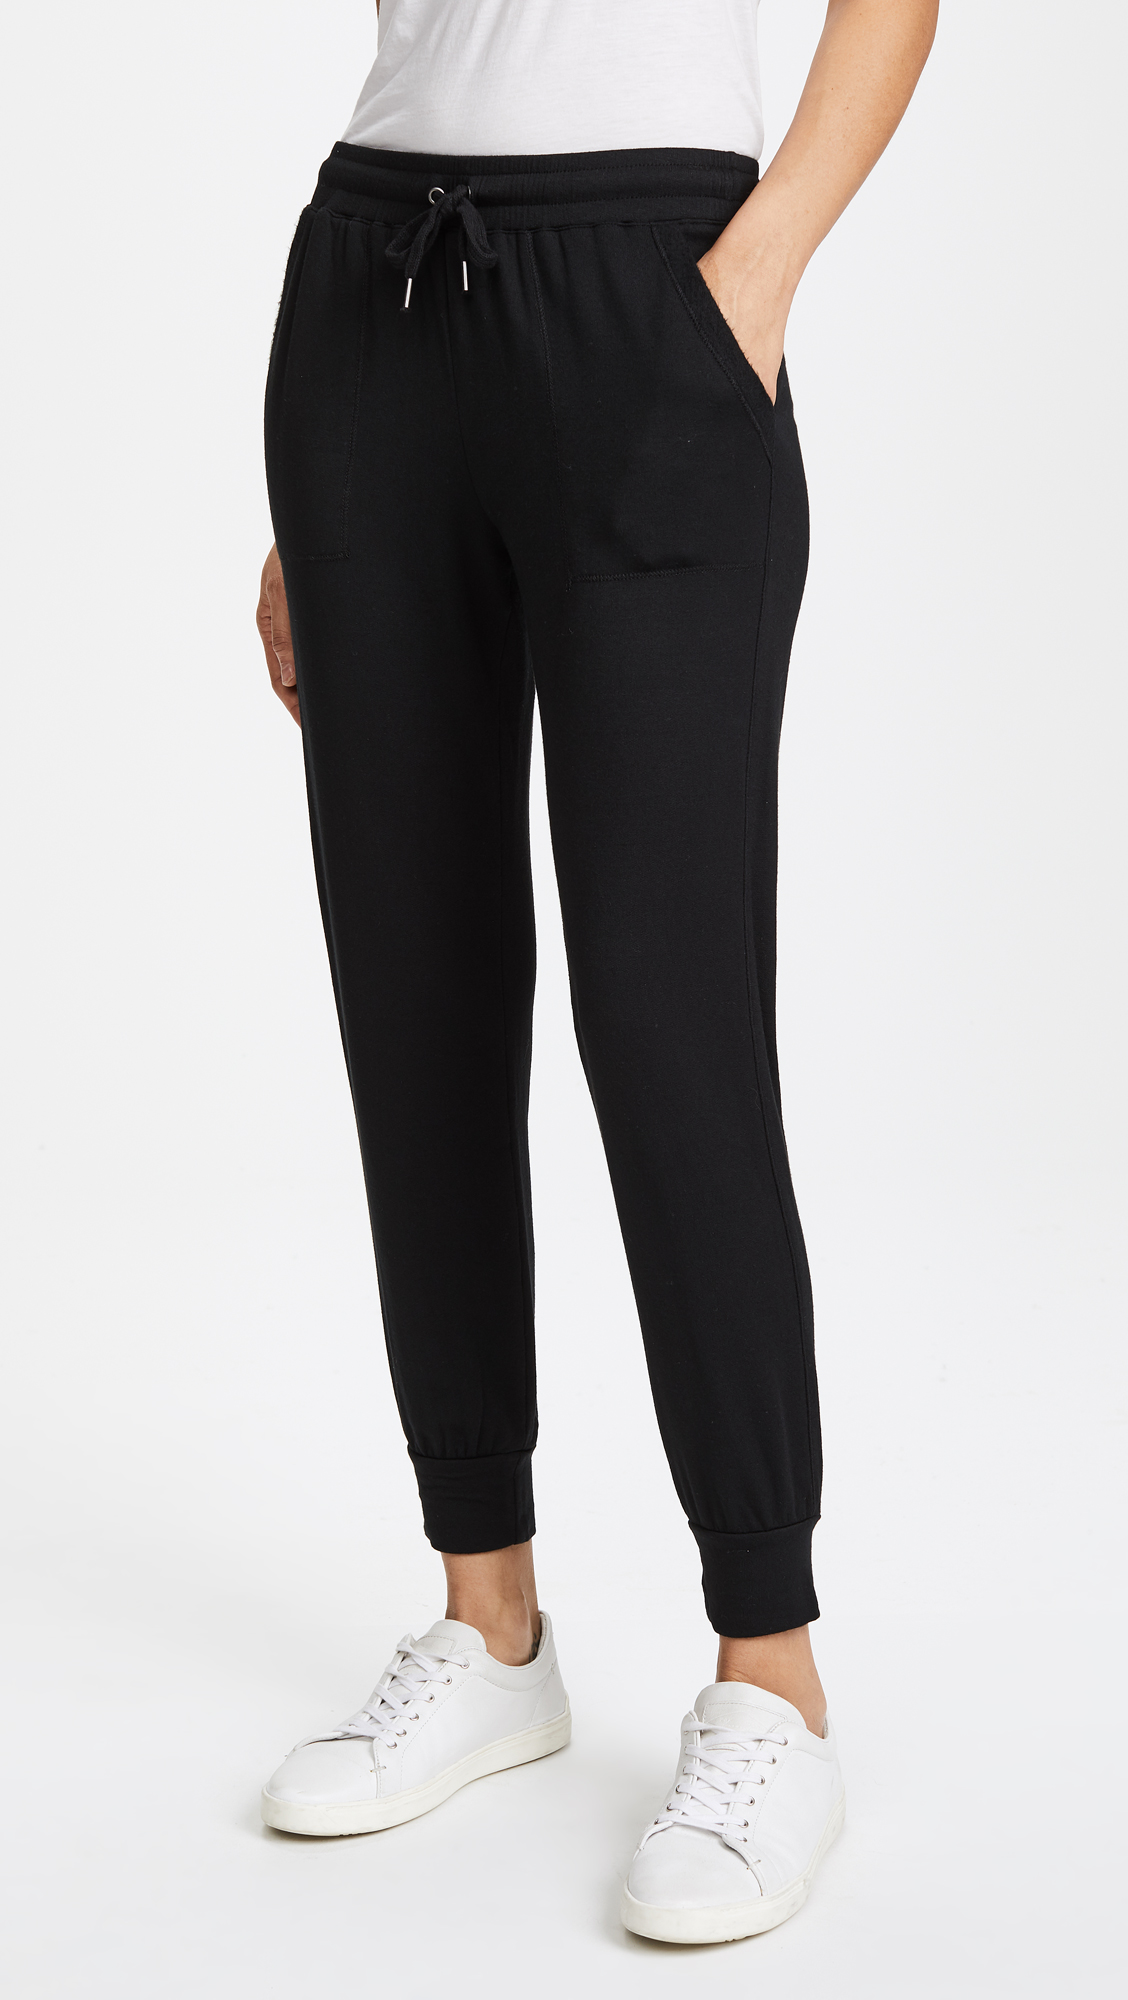 The 24 Best Black Sweatpants for Women at Every Price | Who What Wear